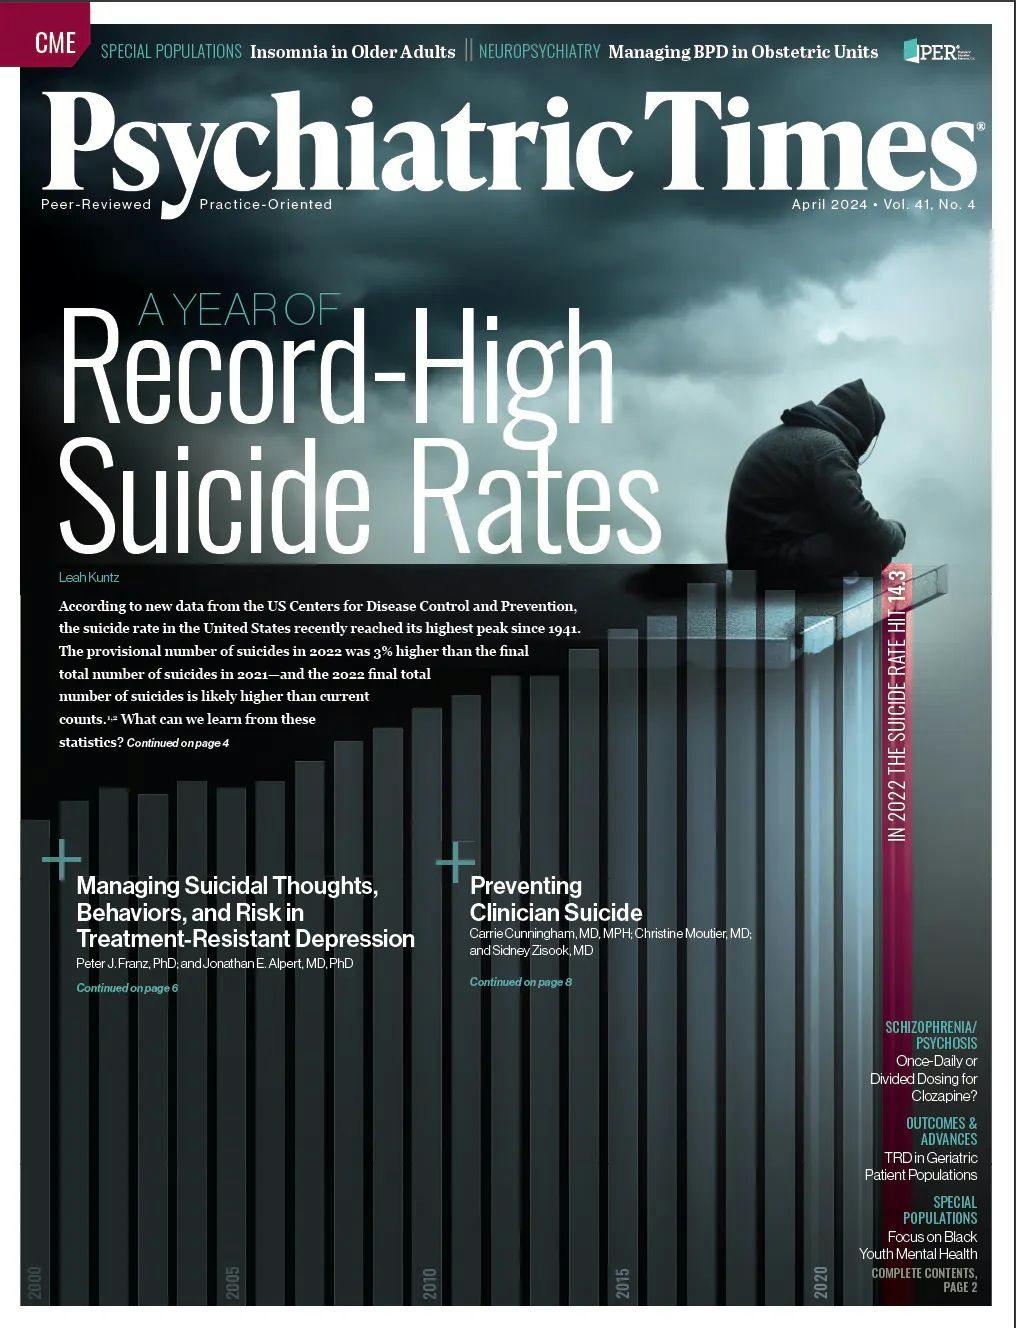 The experts weighed in on a wide variety of psychiatric issues for the April issue of Psychiatric Times.